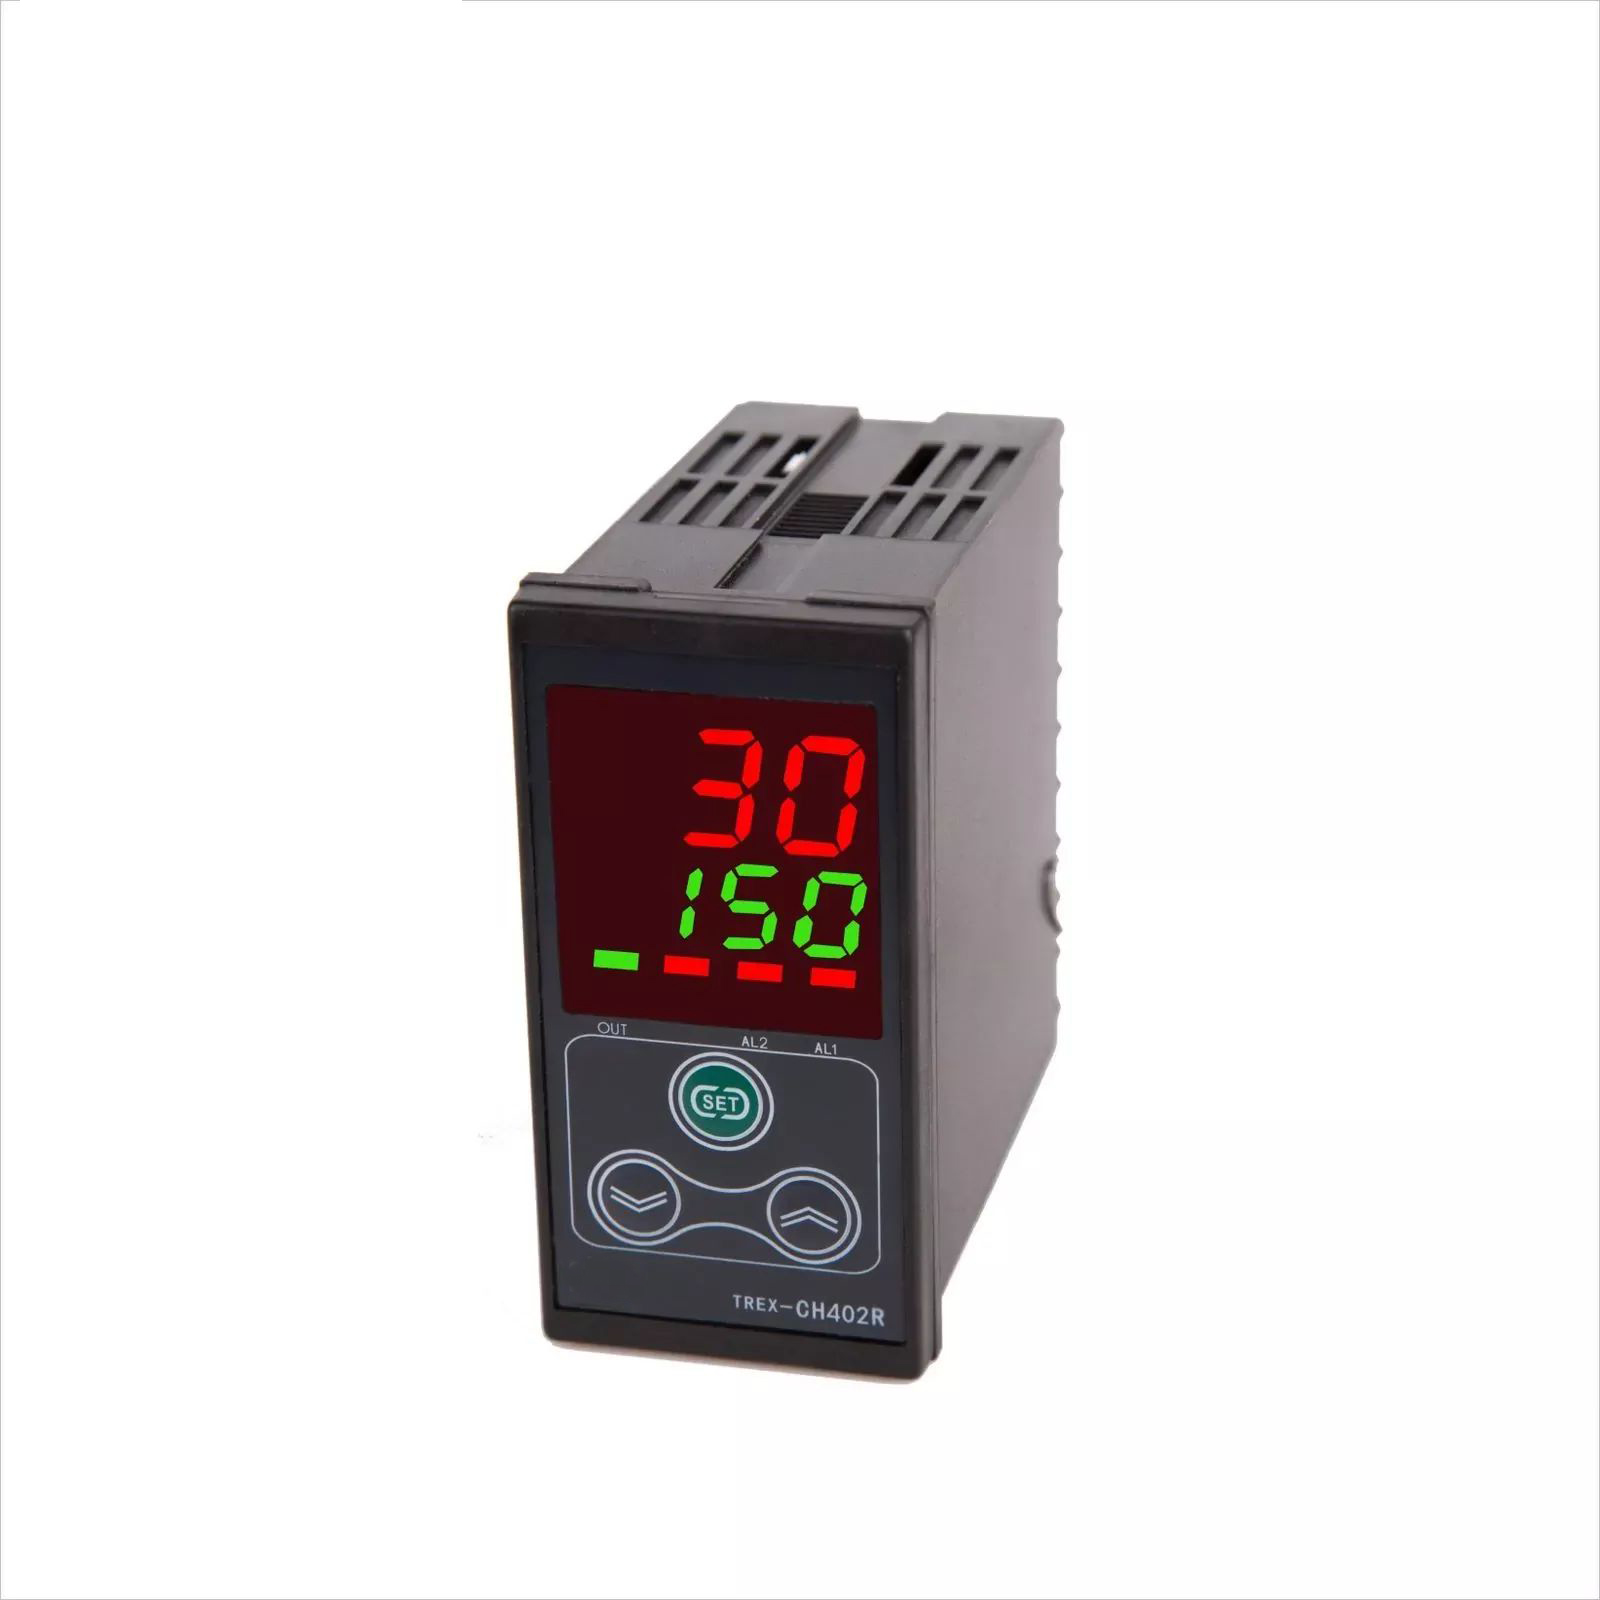 CH402R Integrated digital display aiset pid ssr temperature controller for Bag cutting machine Featured Image